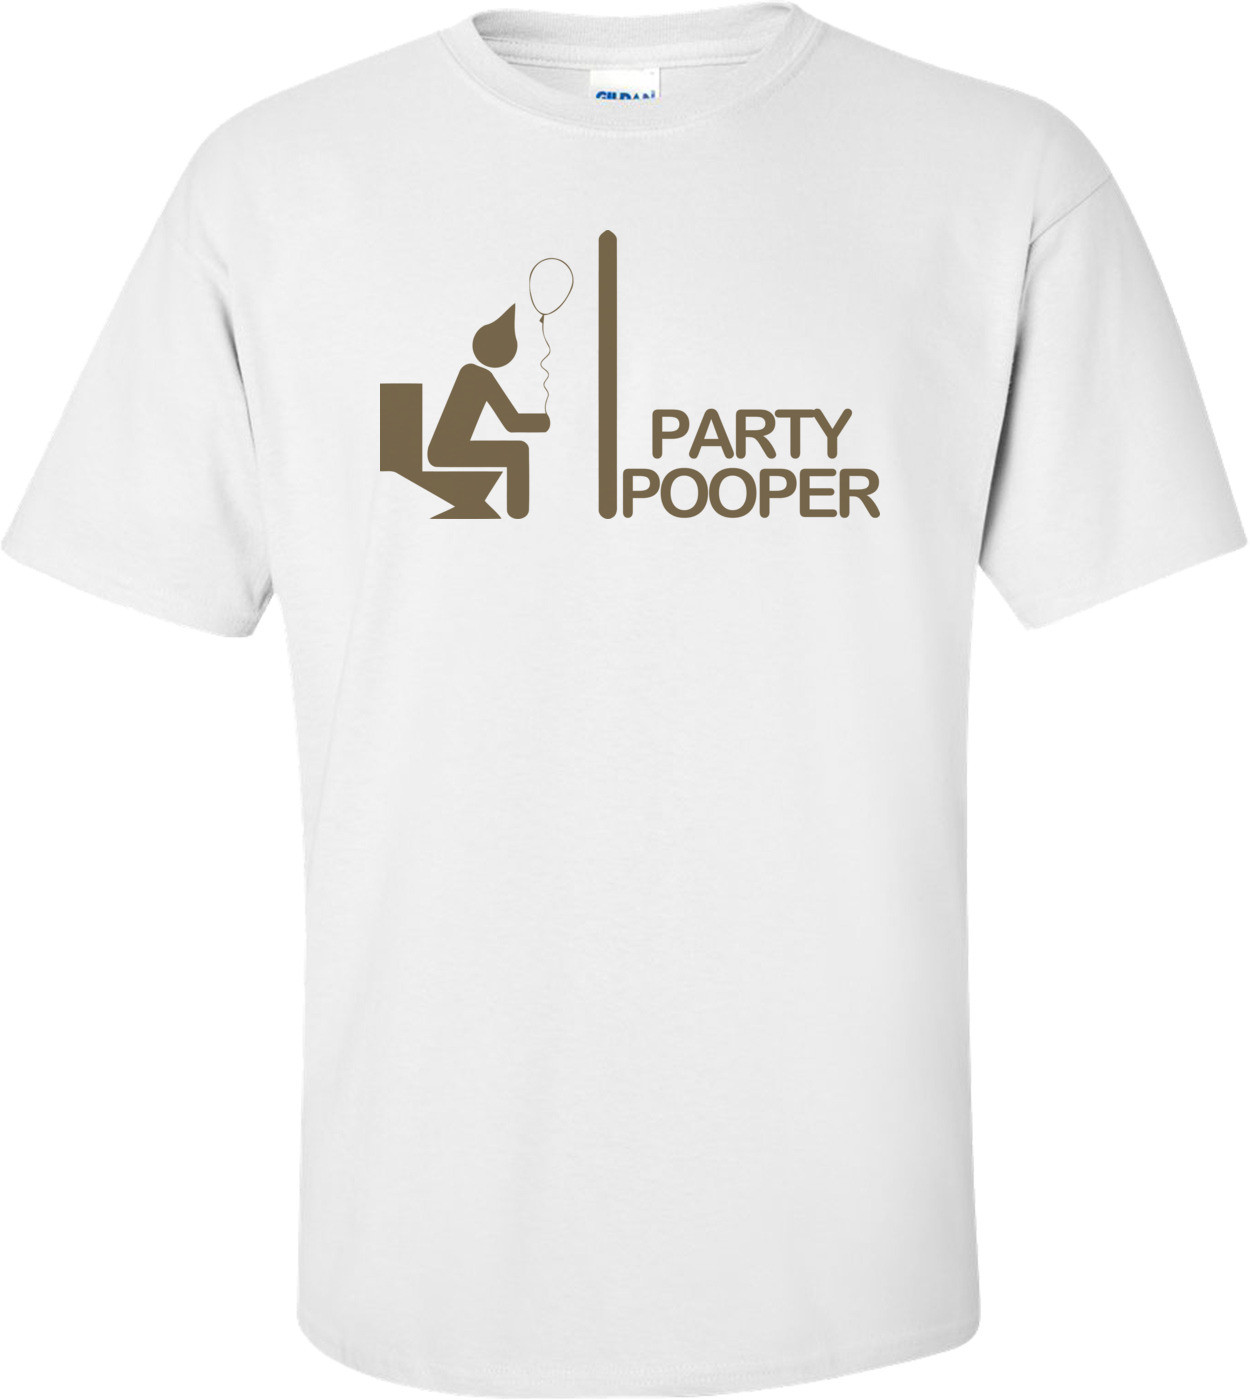 Party Pooper Funny T-shirt